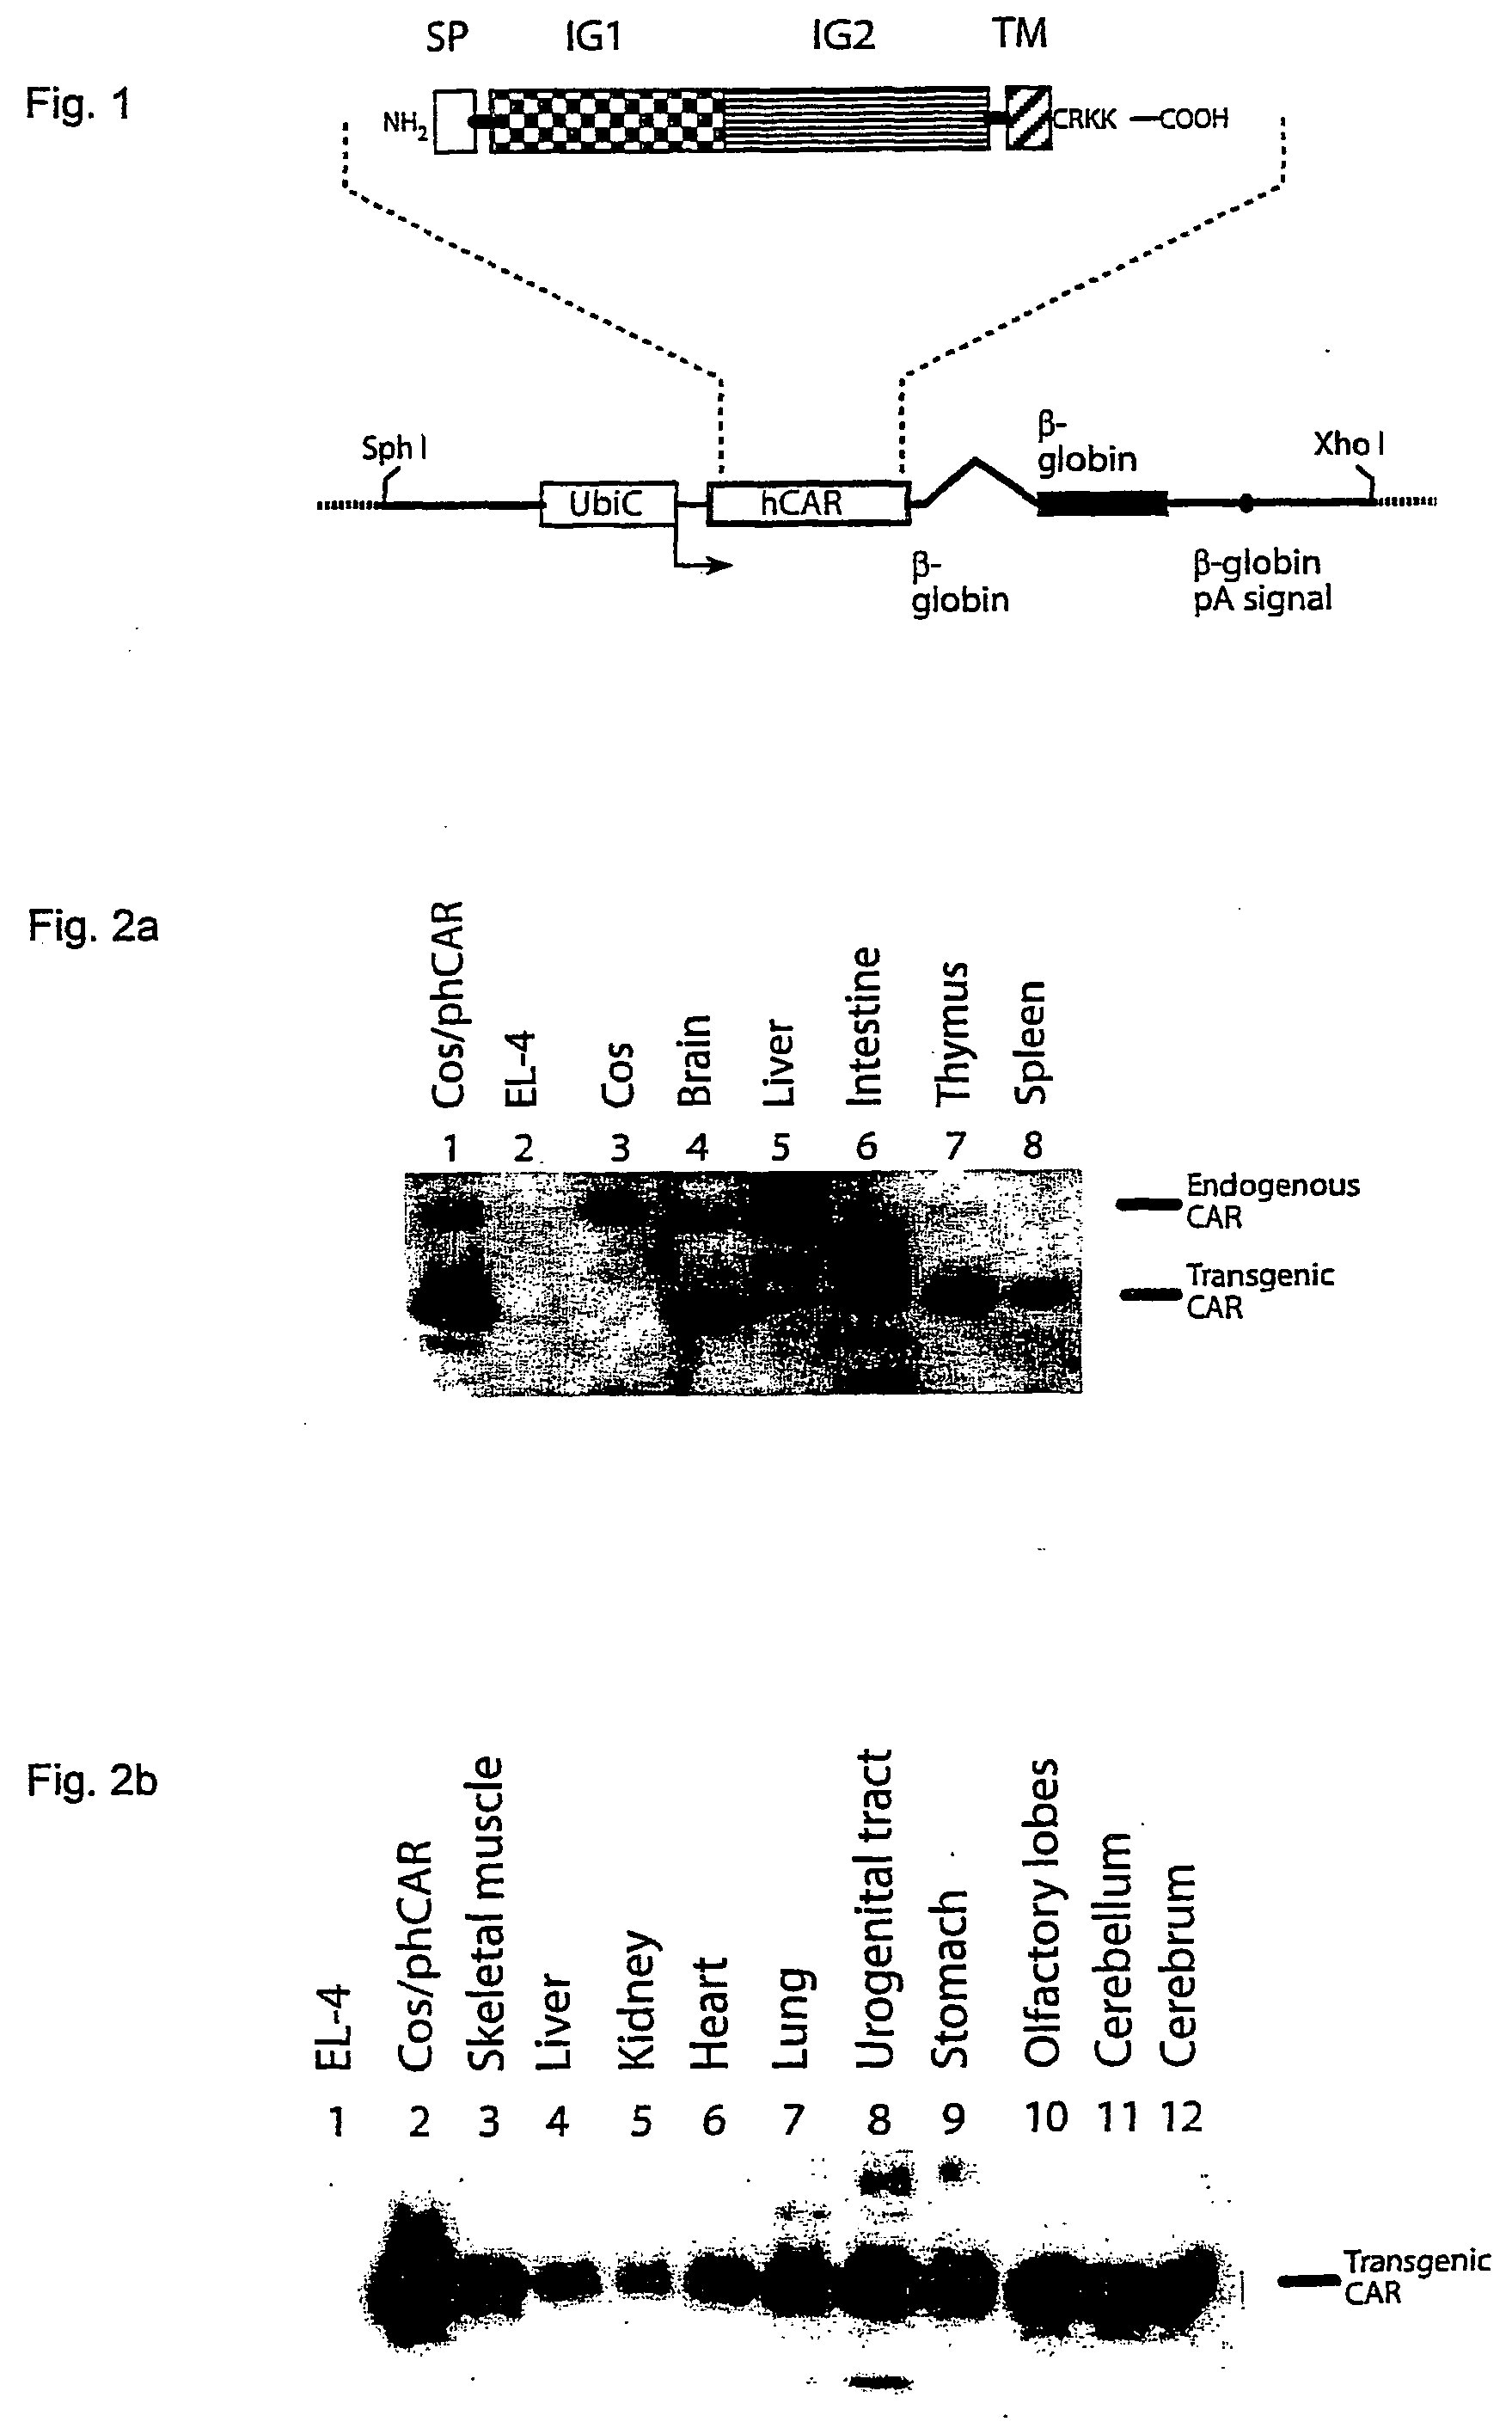 Method of obtaining a non-human mammal susceptible to adenovirus-mediated gene delivery, a method for such delivery, and a non-human mammal susceptible to such delivery